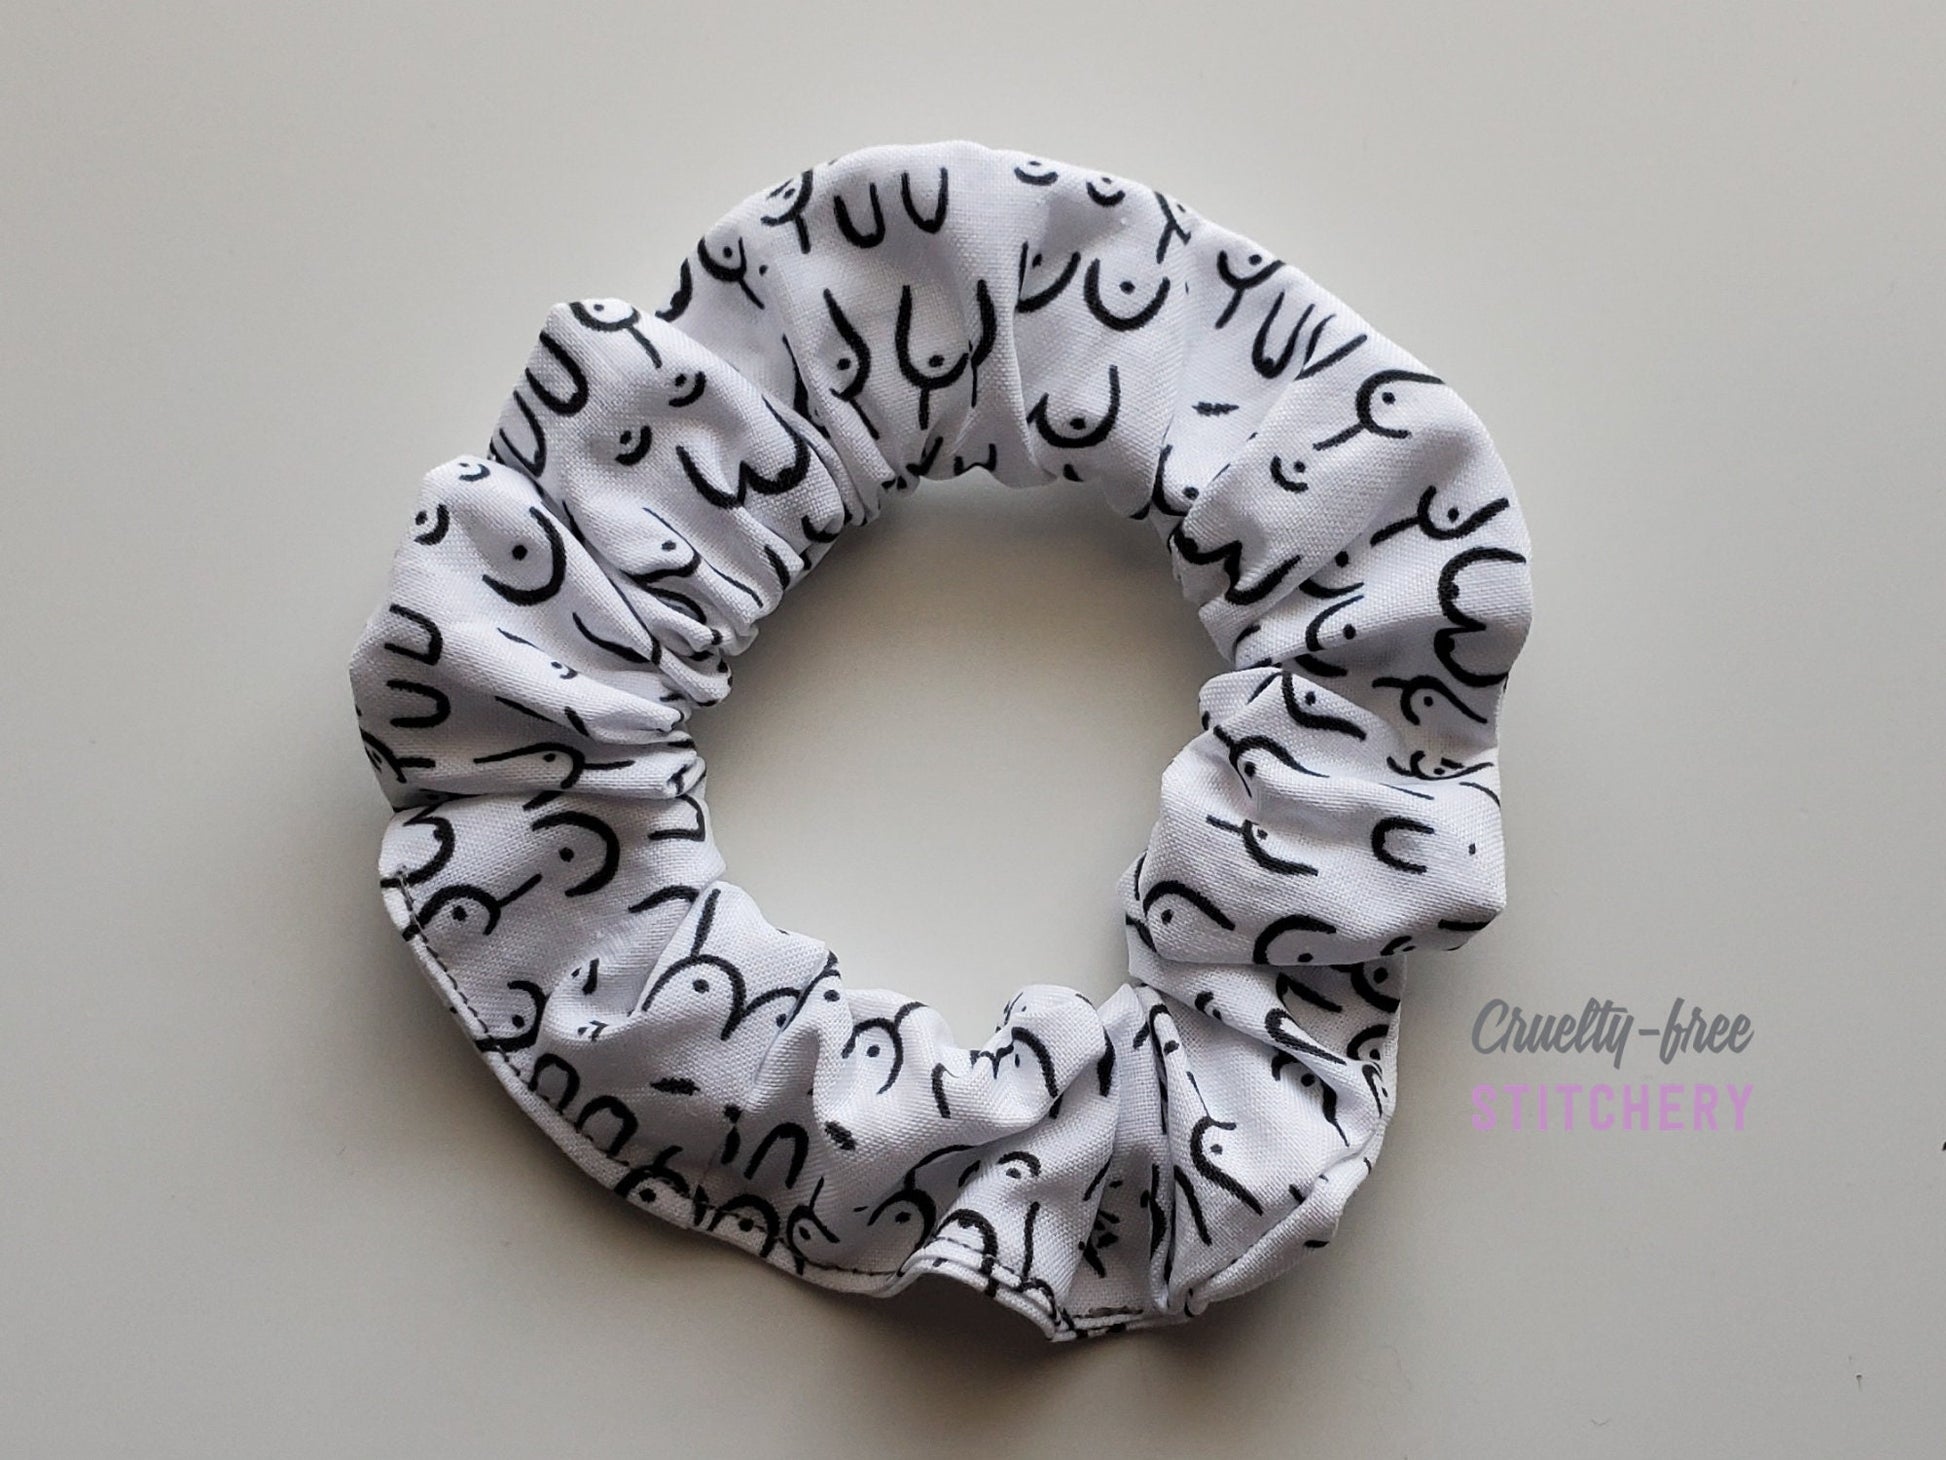 Boobs print black and white scrunchie in natural lighting.